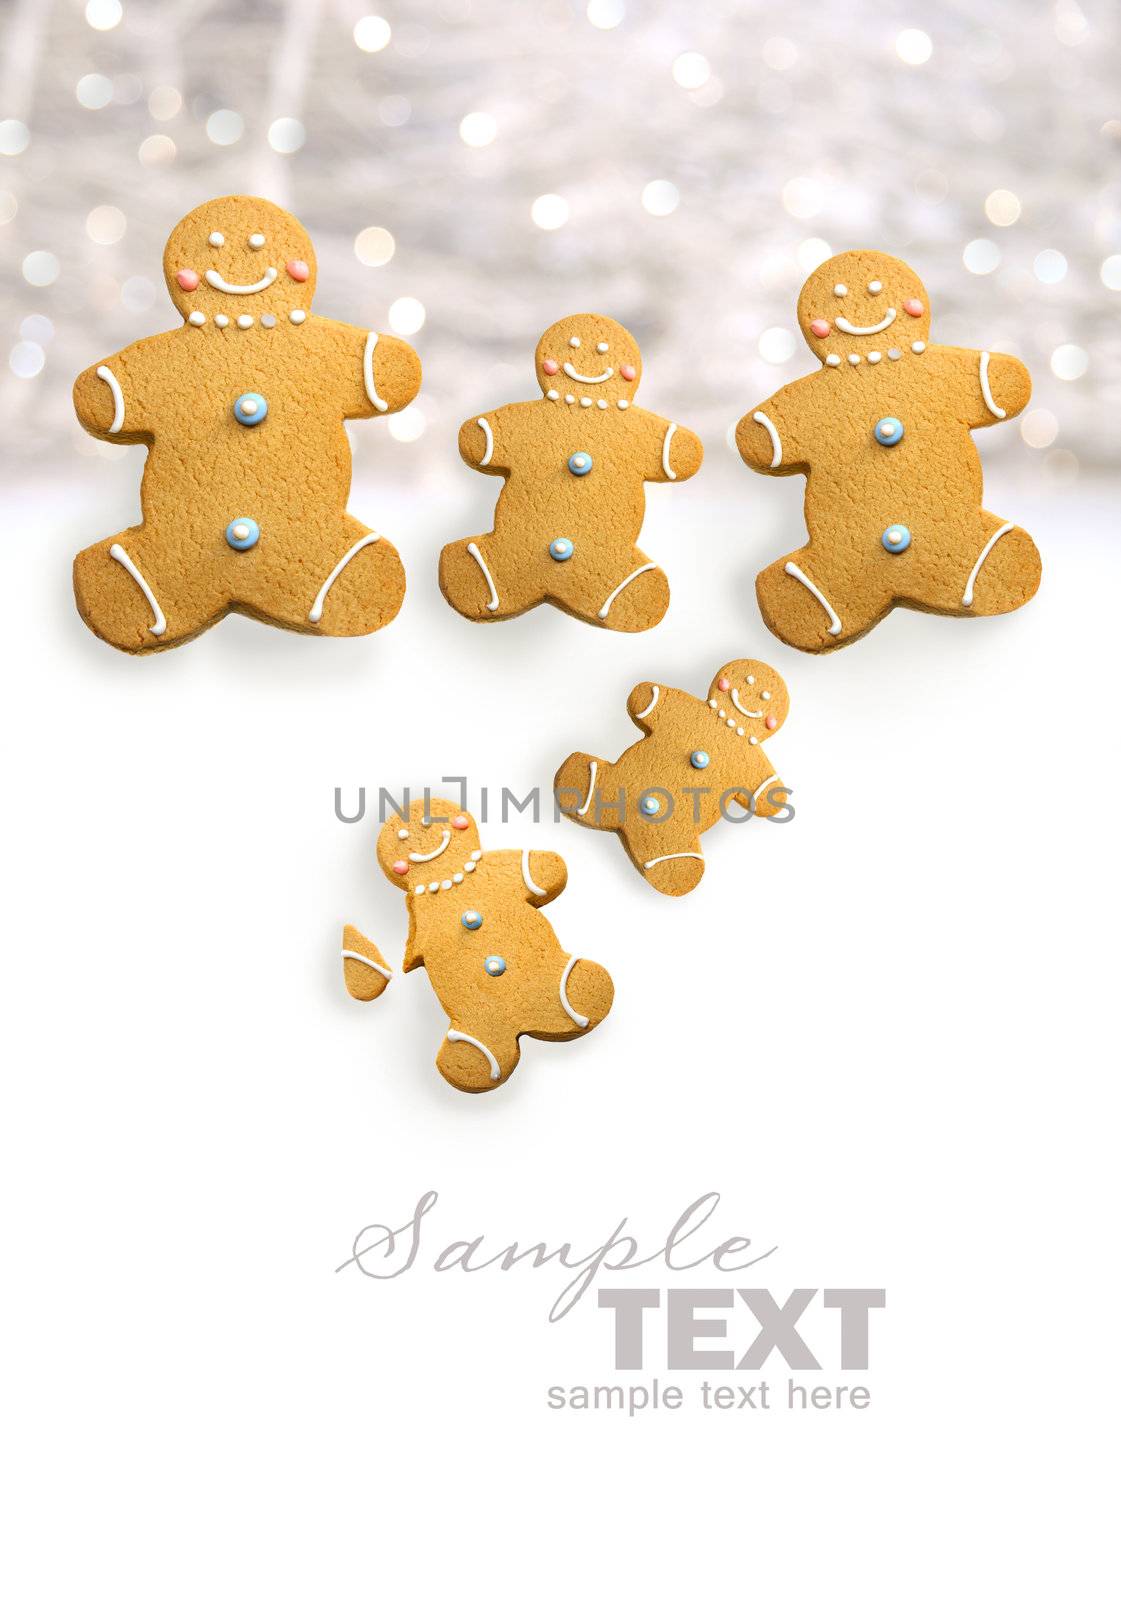 Gingerbread men cookies against sparkly white background